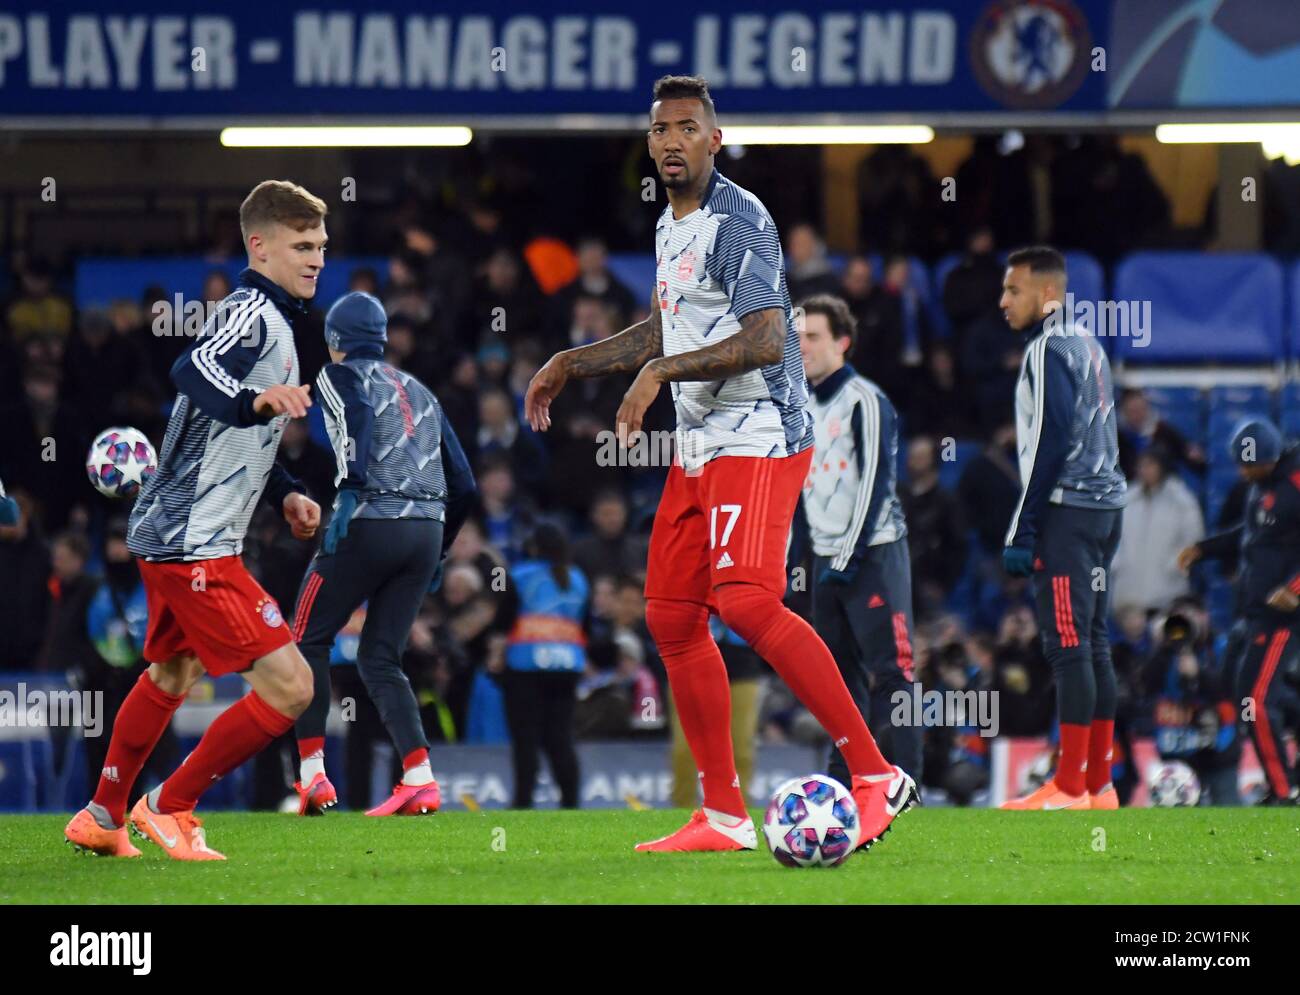 LONDON, ENGLAND - FEBRUARY 26, 2020: Jerome Boateng of Bayern pictured during the 2019/20 UEFA Champions League Round of 16 game between Chelsea FC and Bayern Munich at Stamford Bridge. Stock Photo